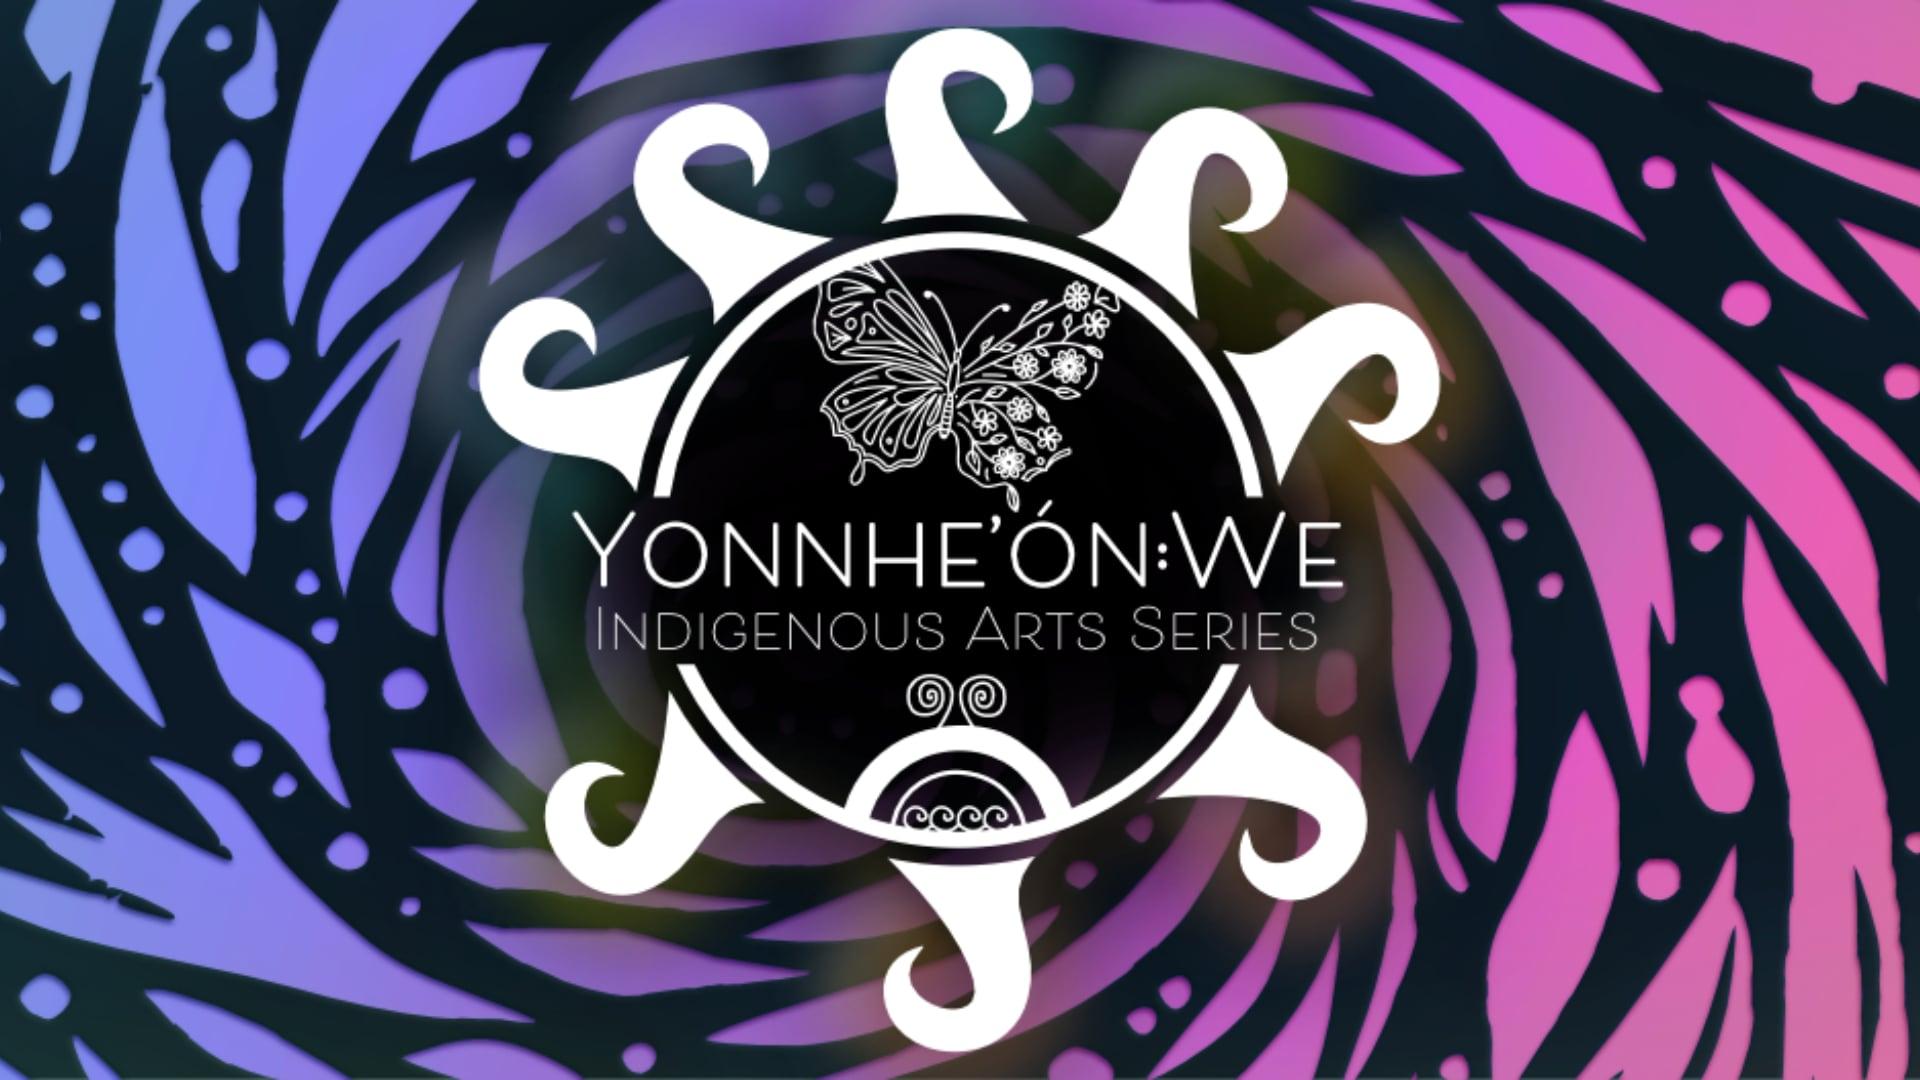 Yonnhe’ón:we Indigenous Arts Series returns this coming February with two special film nights scheduled